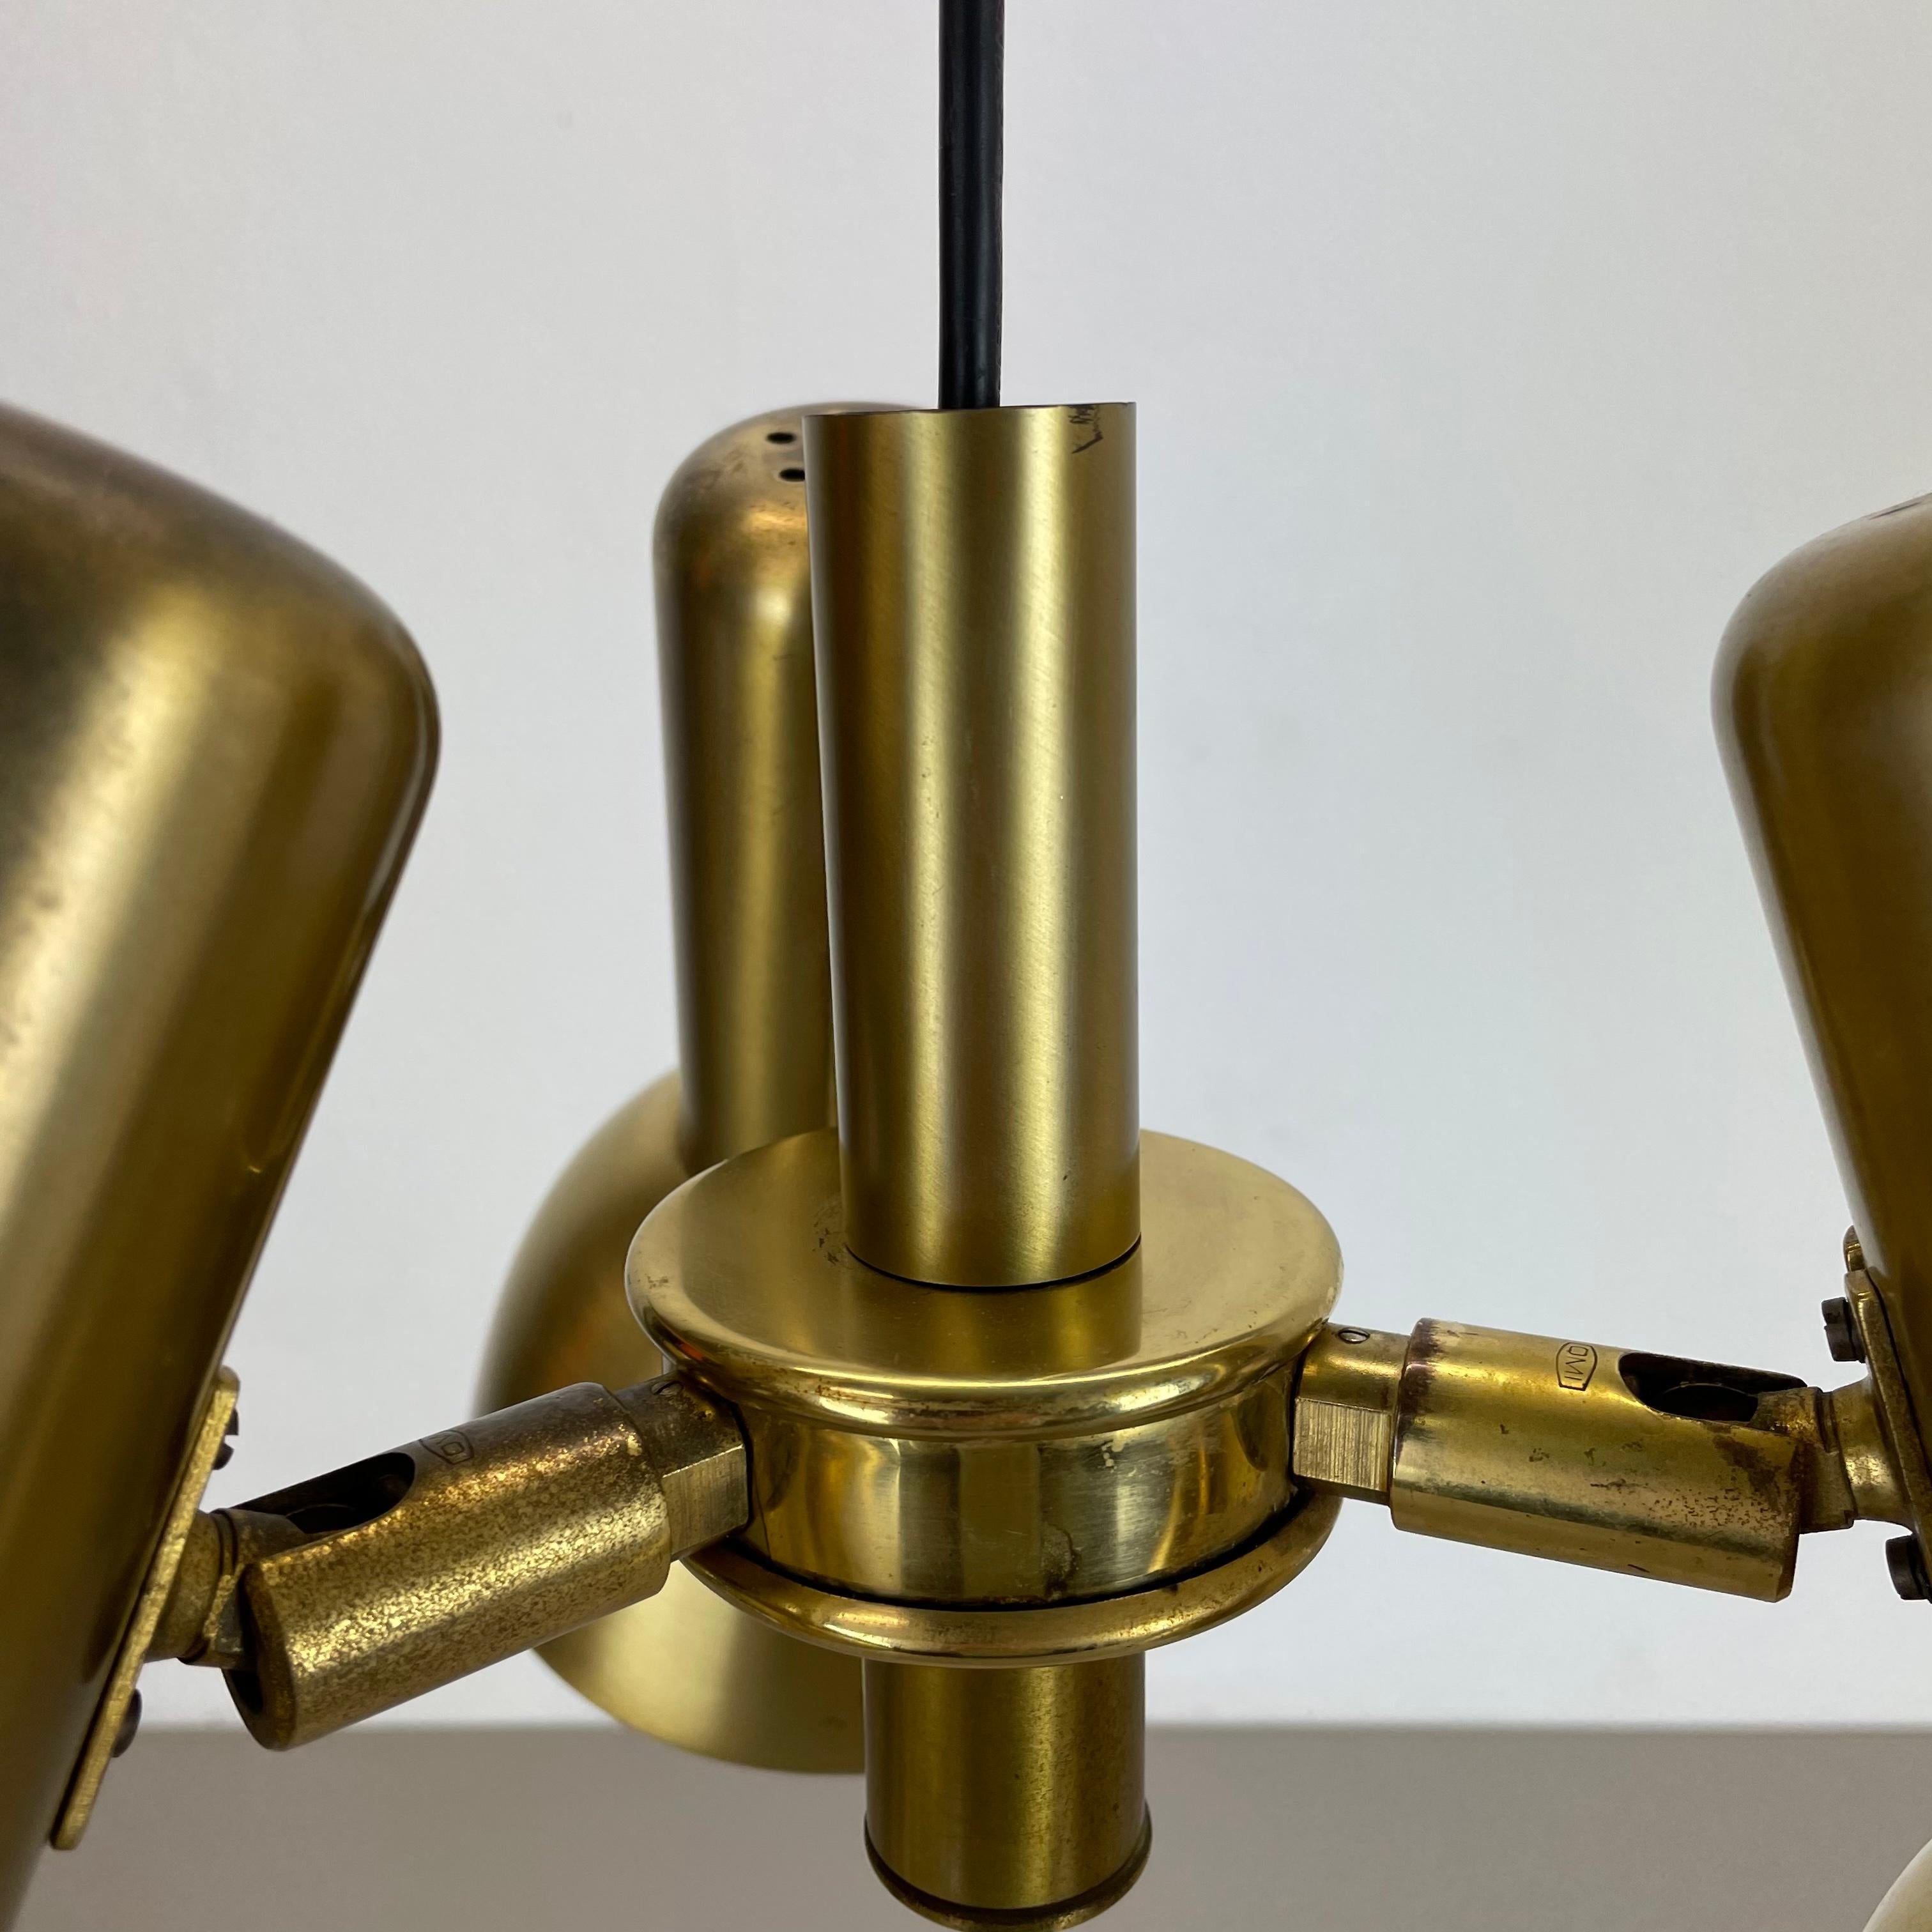 3-Spot Brass Tone Hanging Light Koch and Lowy Style OMI Lighting, Germany, 1970 For Sale 5